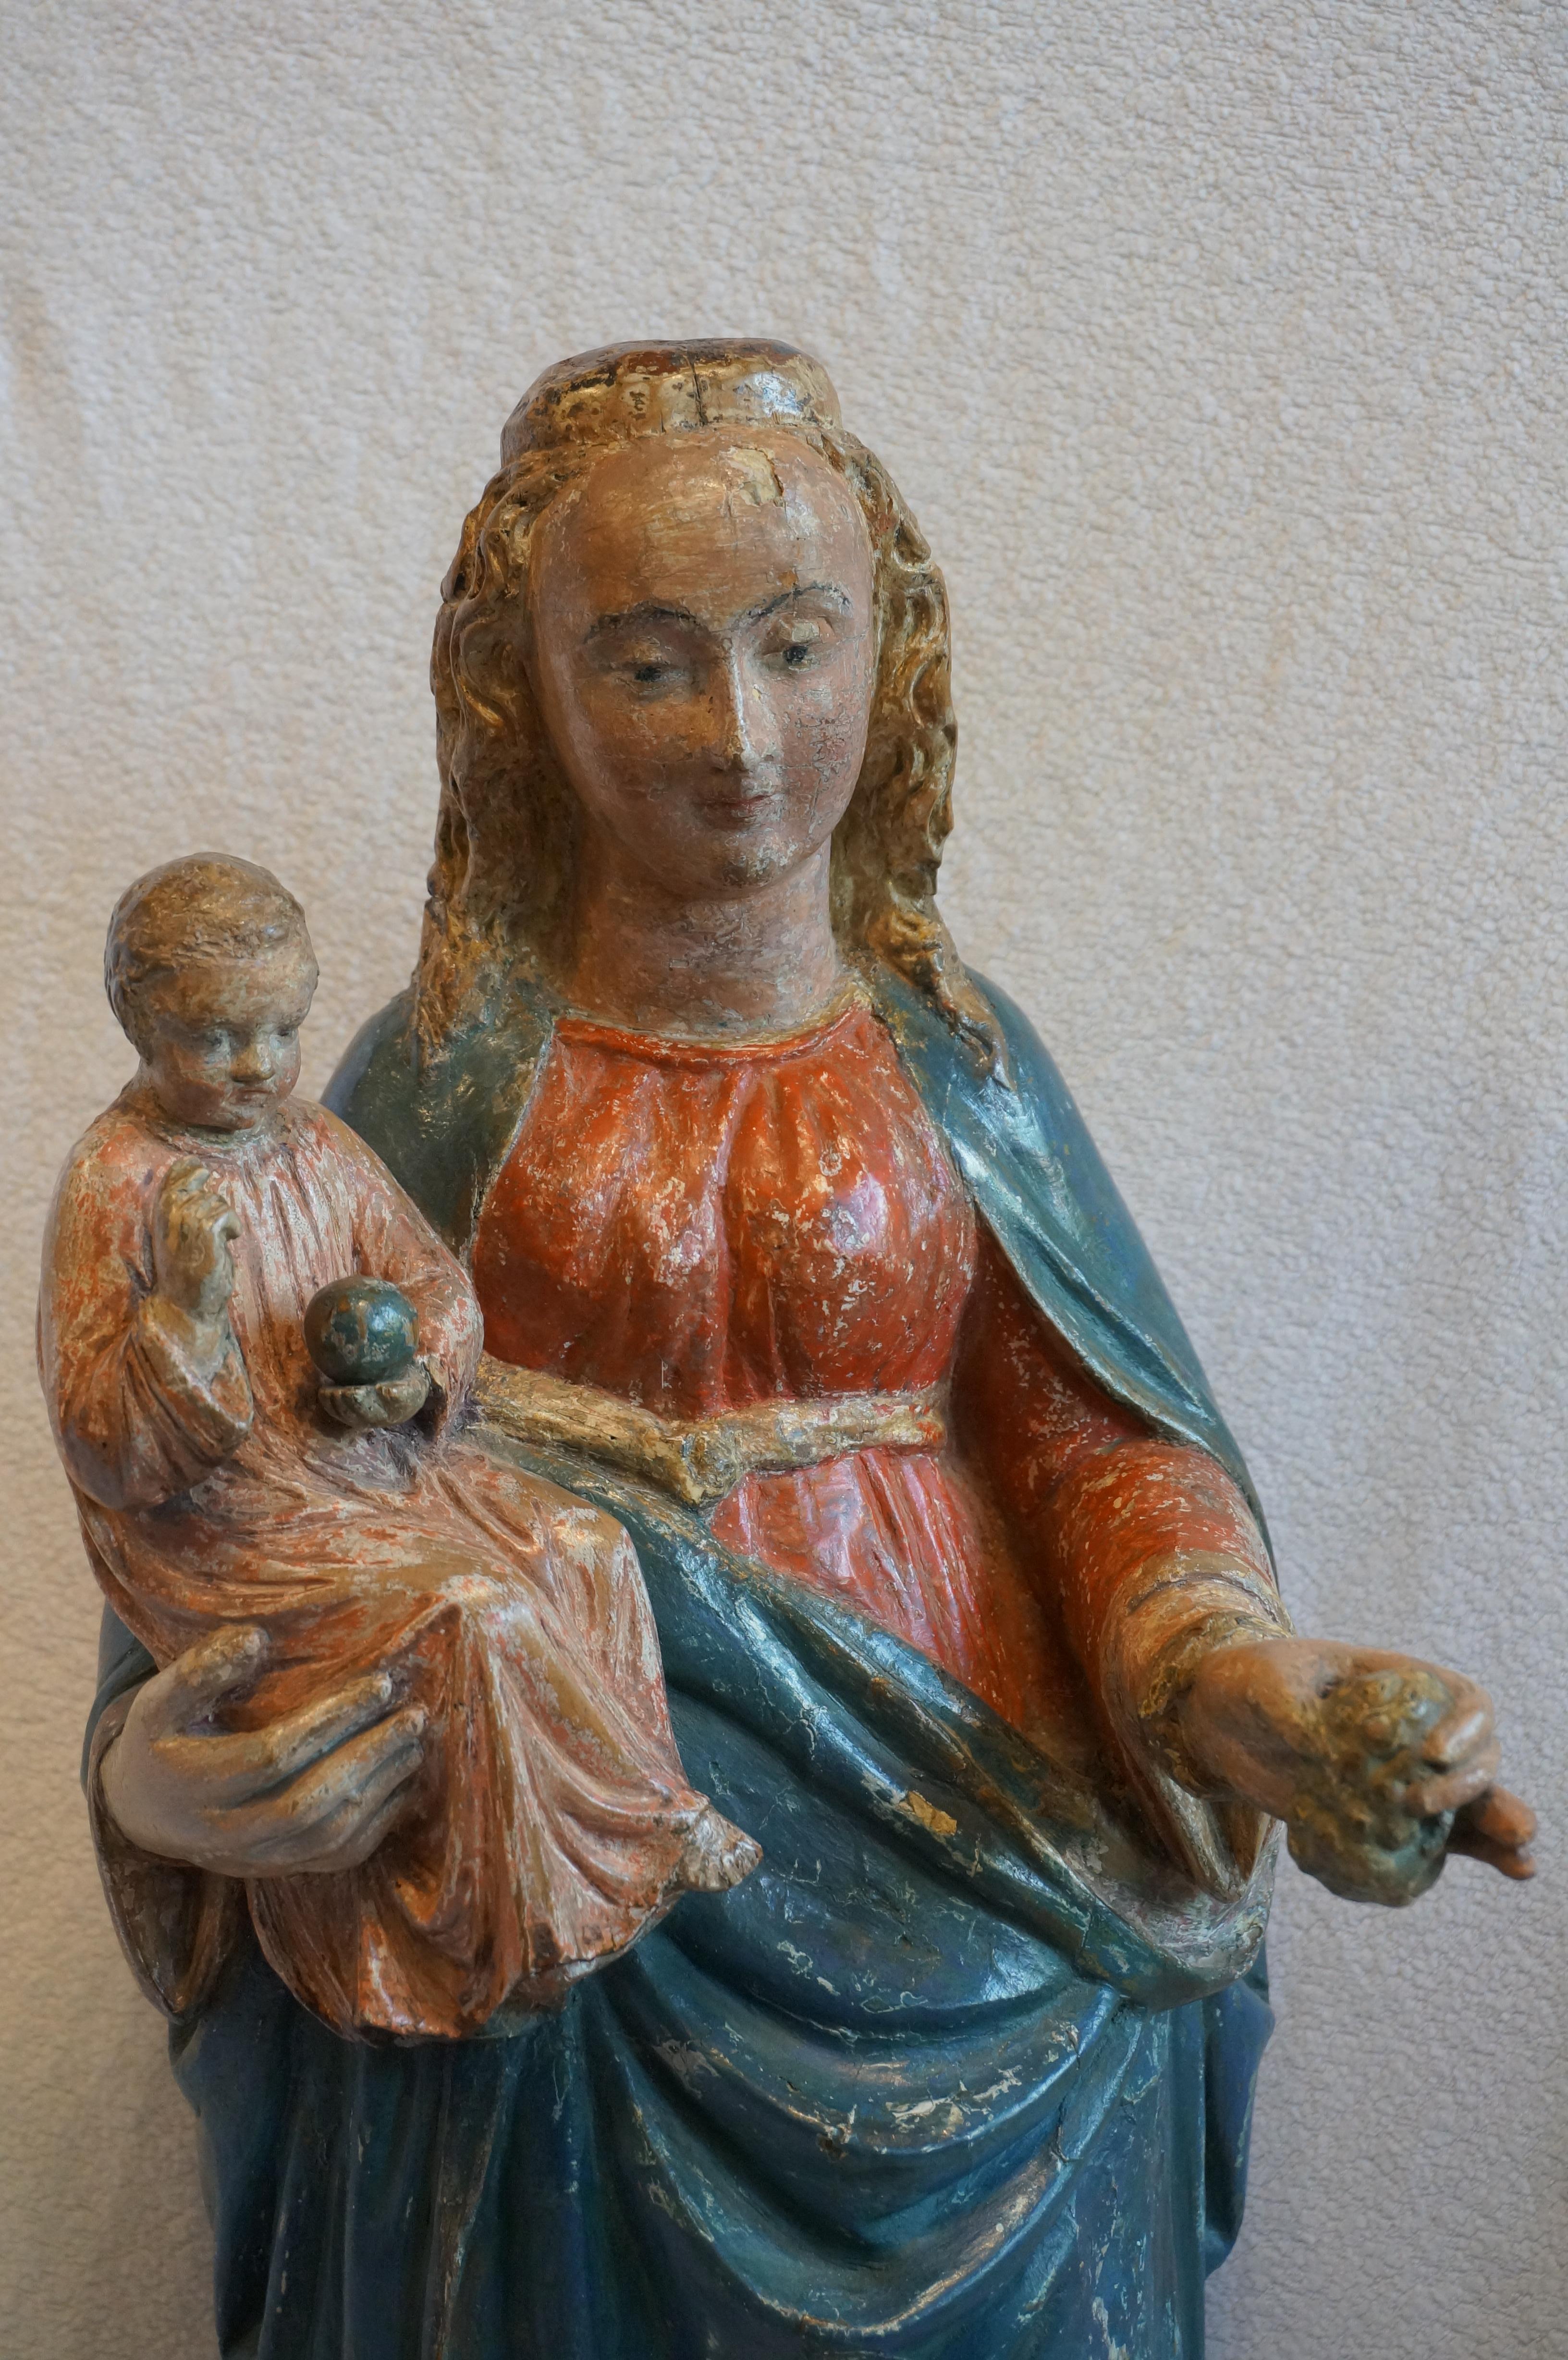 Antique Sculpture of Mary with the Child Jesus, Belgium, early 17th century For Sale 4